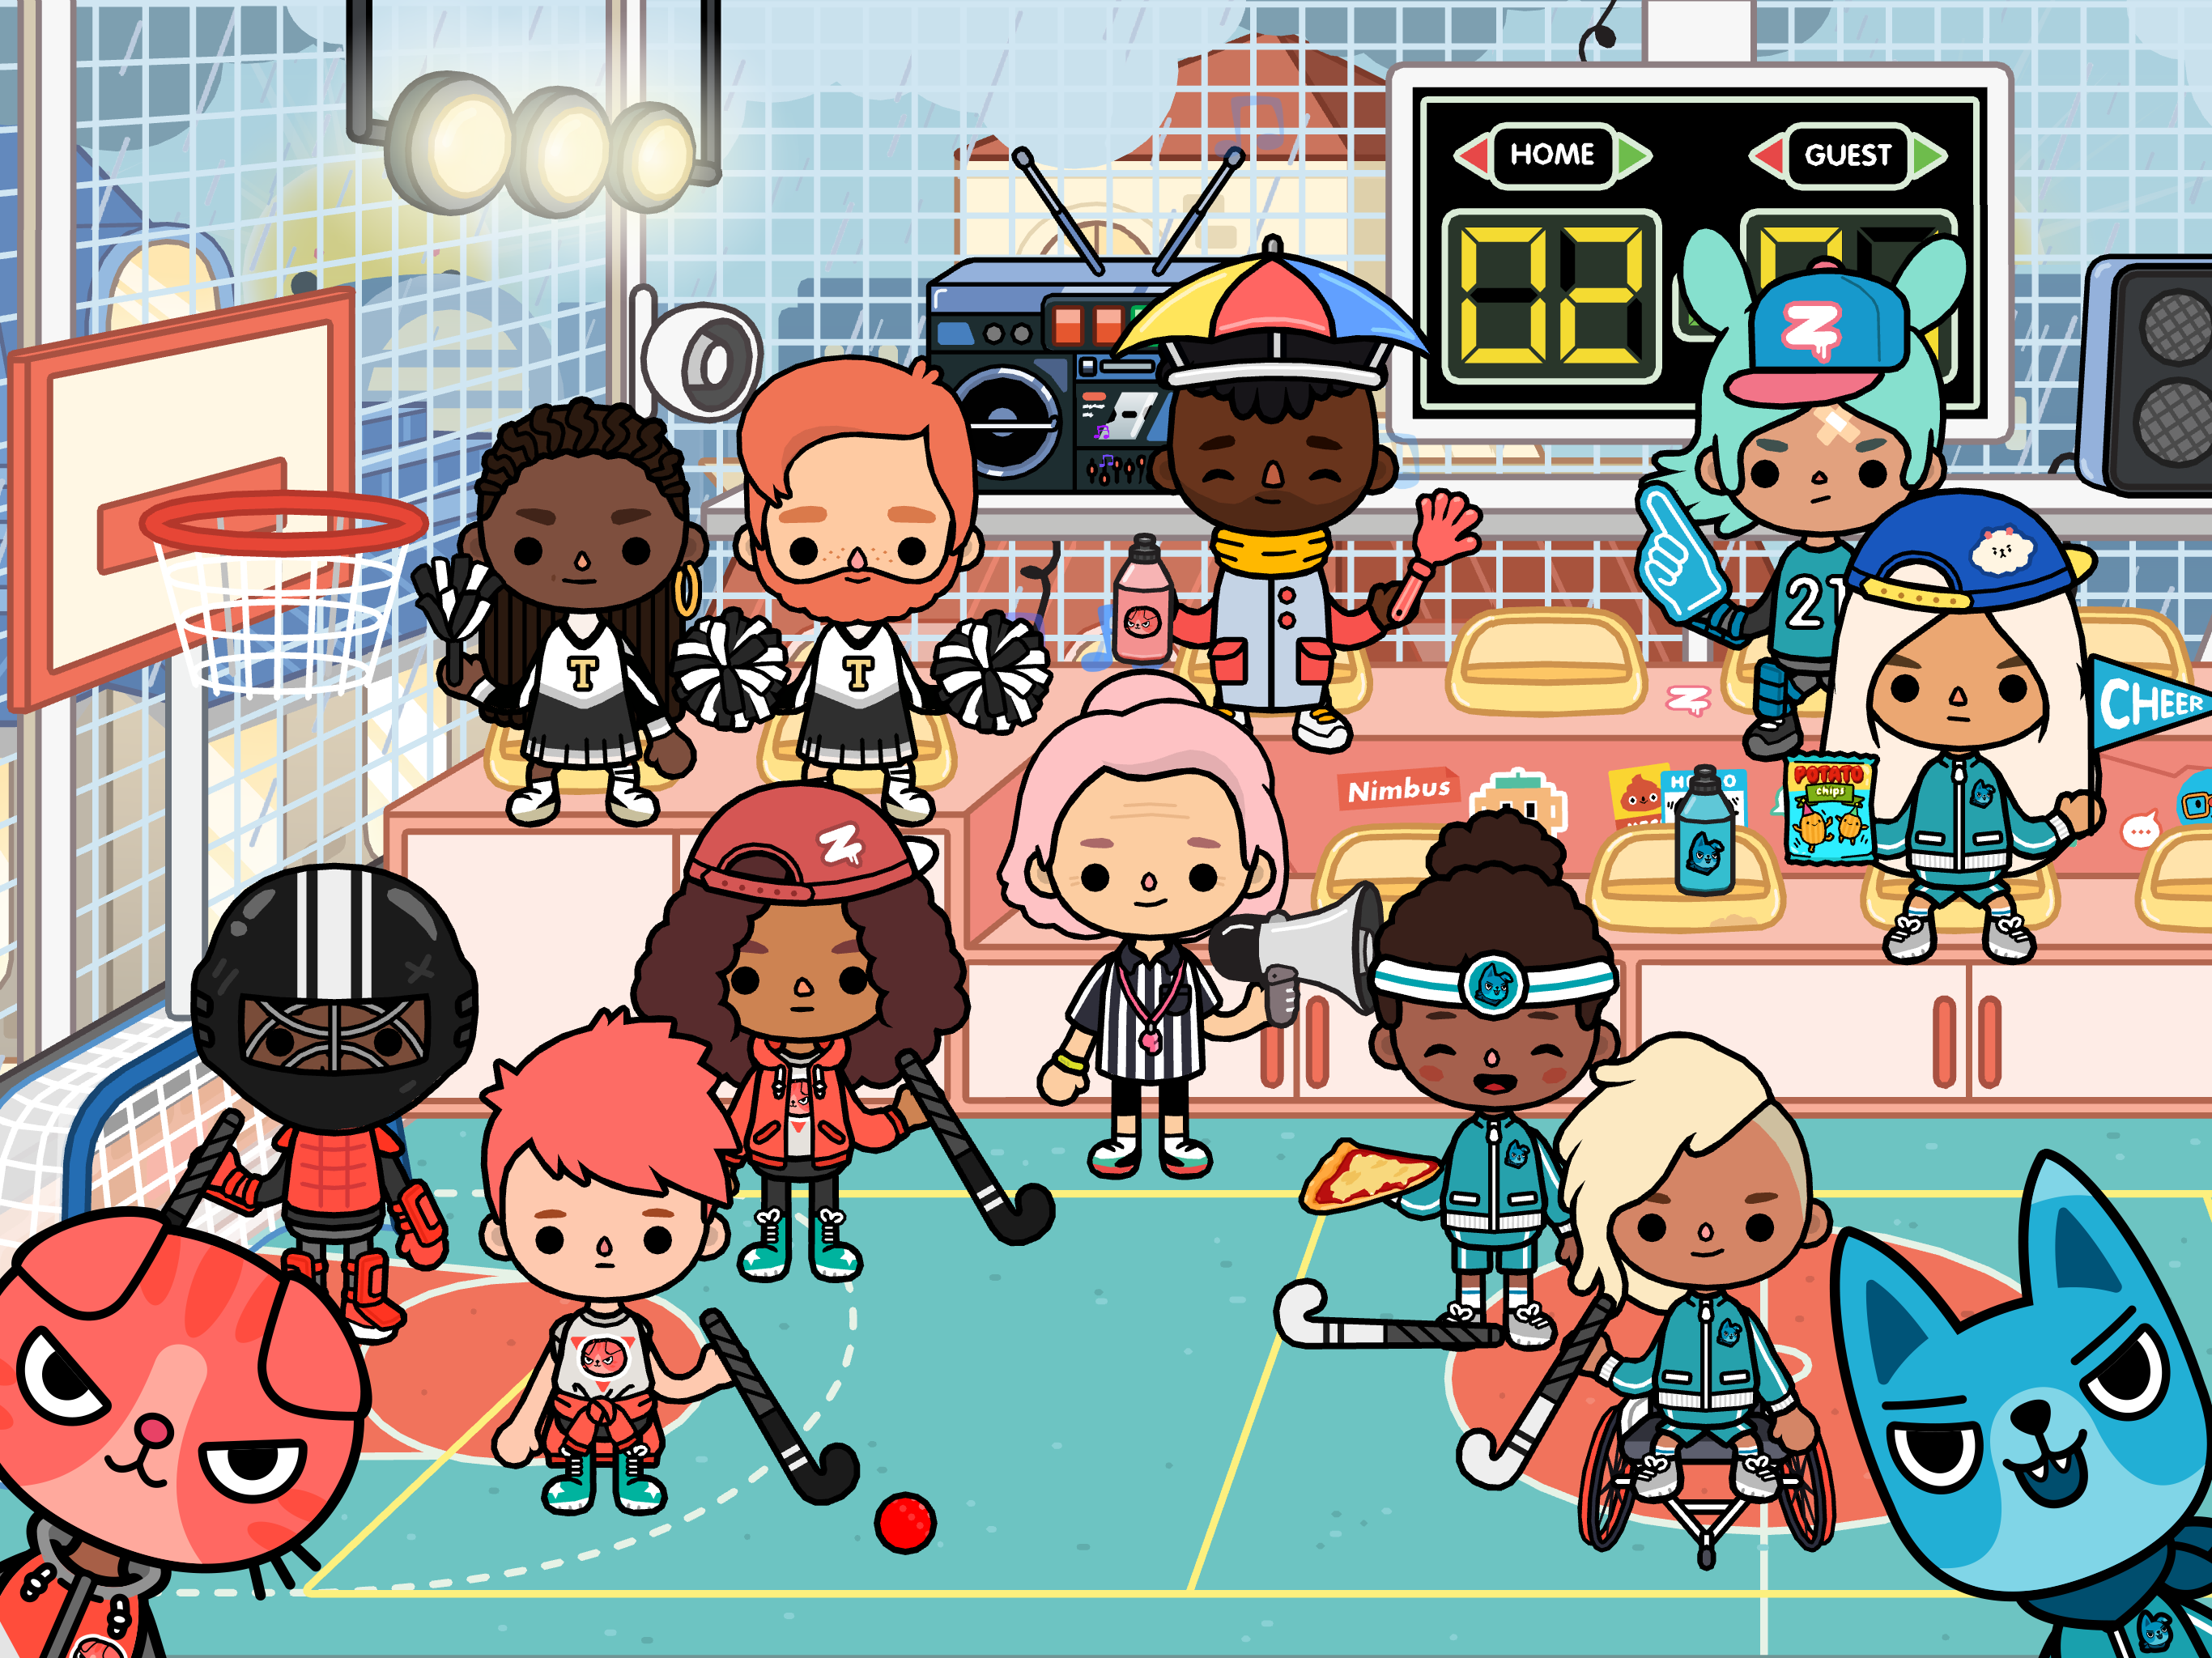 Apps, The Power of Play, Toca Boca